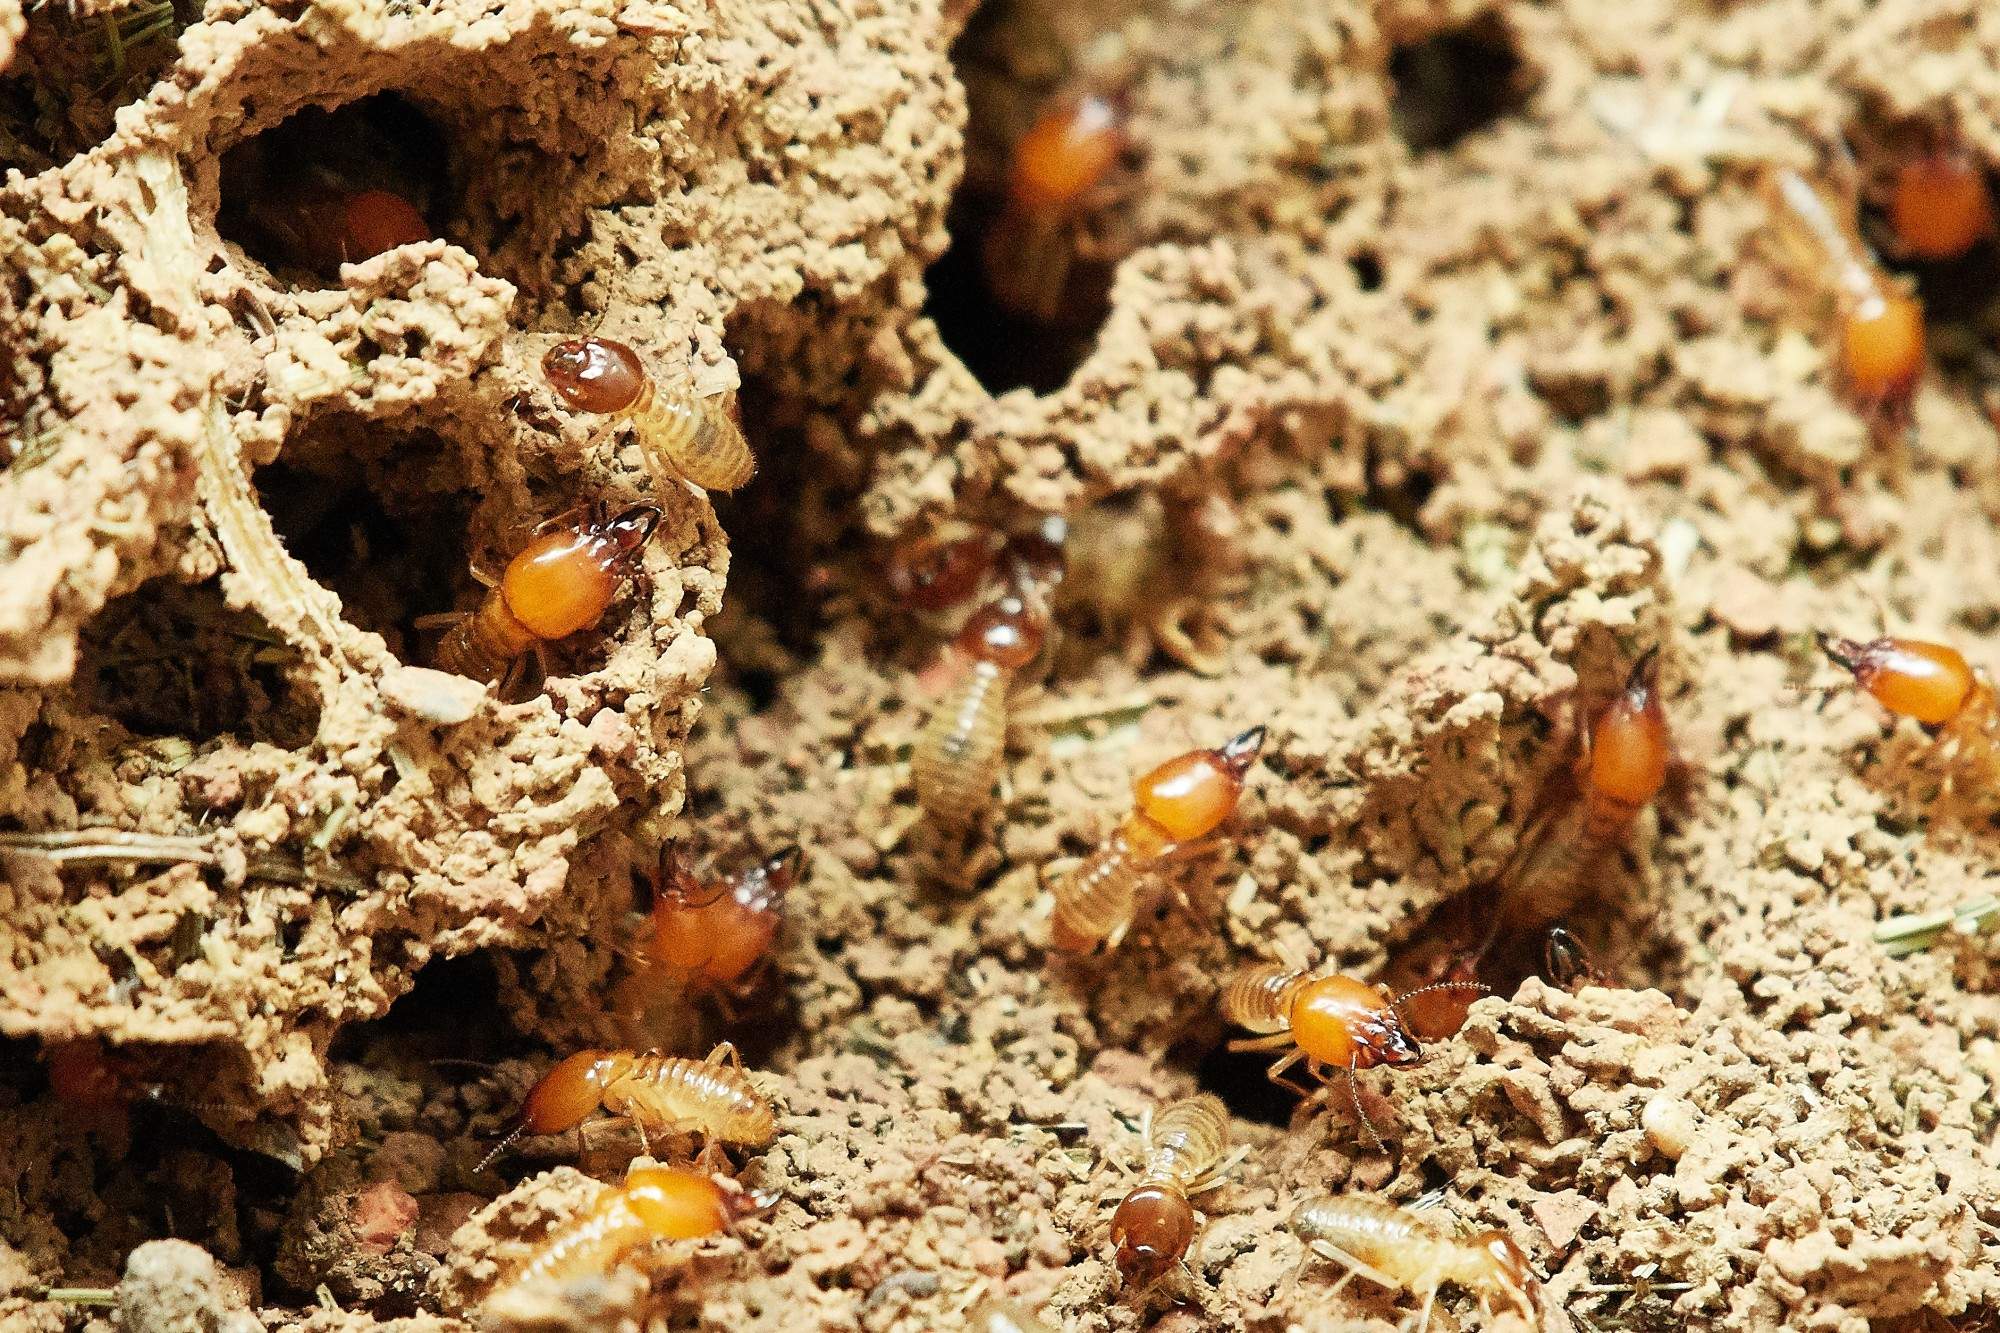 How to Get Rid of Termites: A Guide for Homeowners